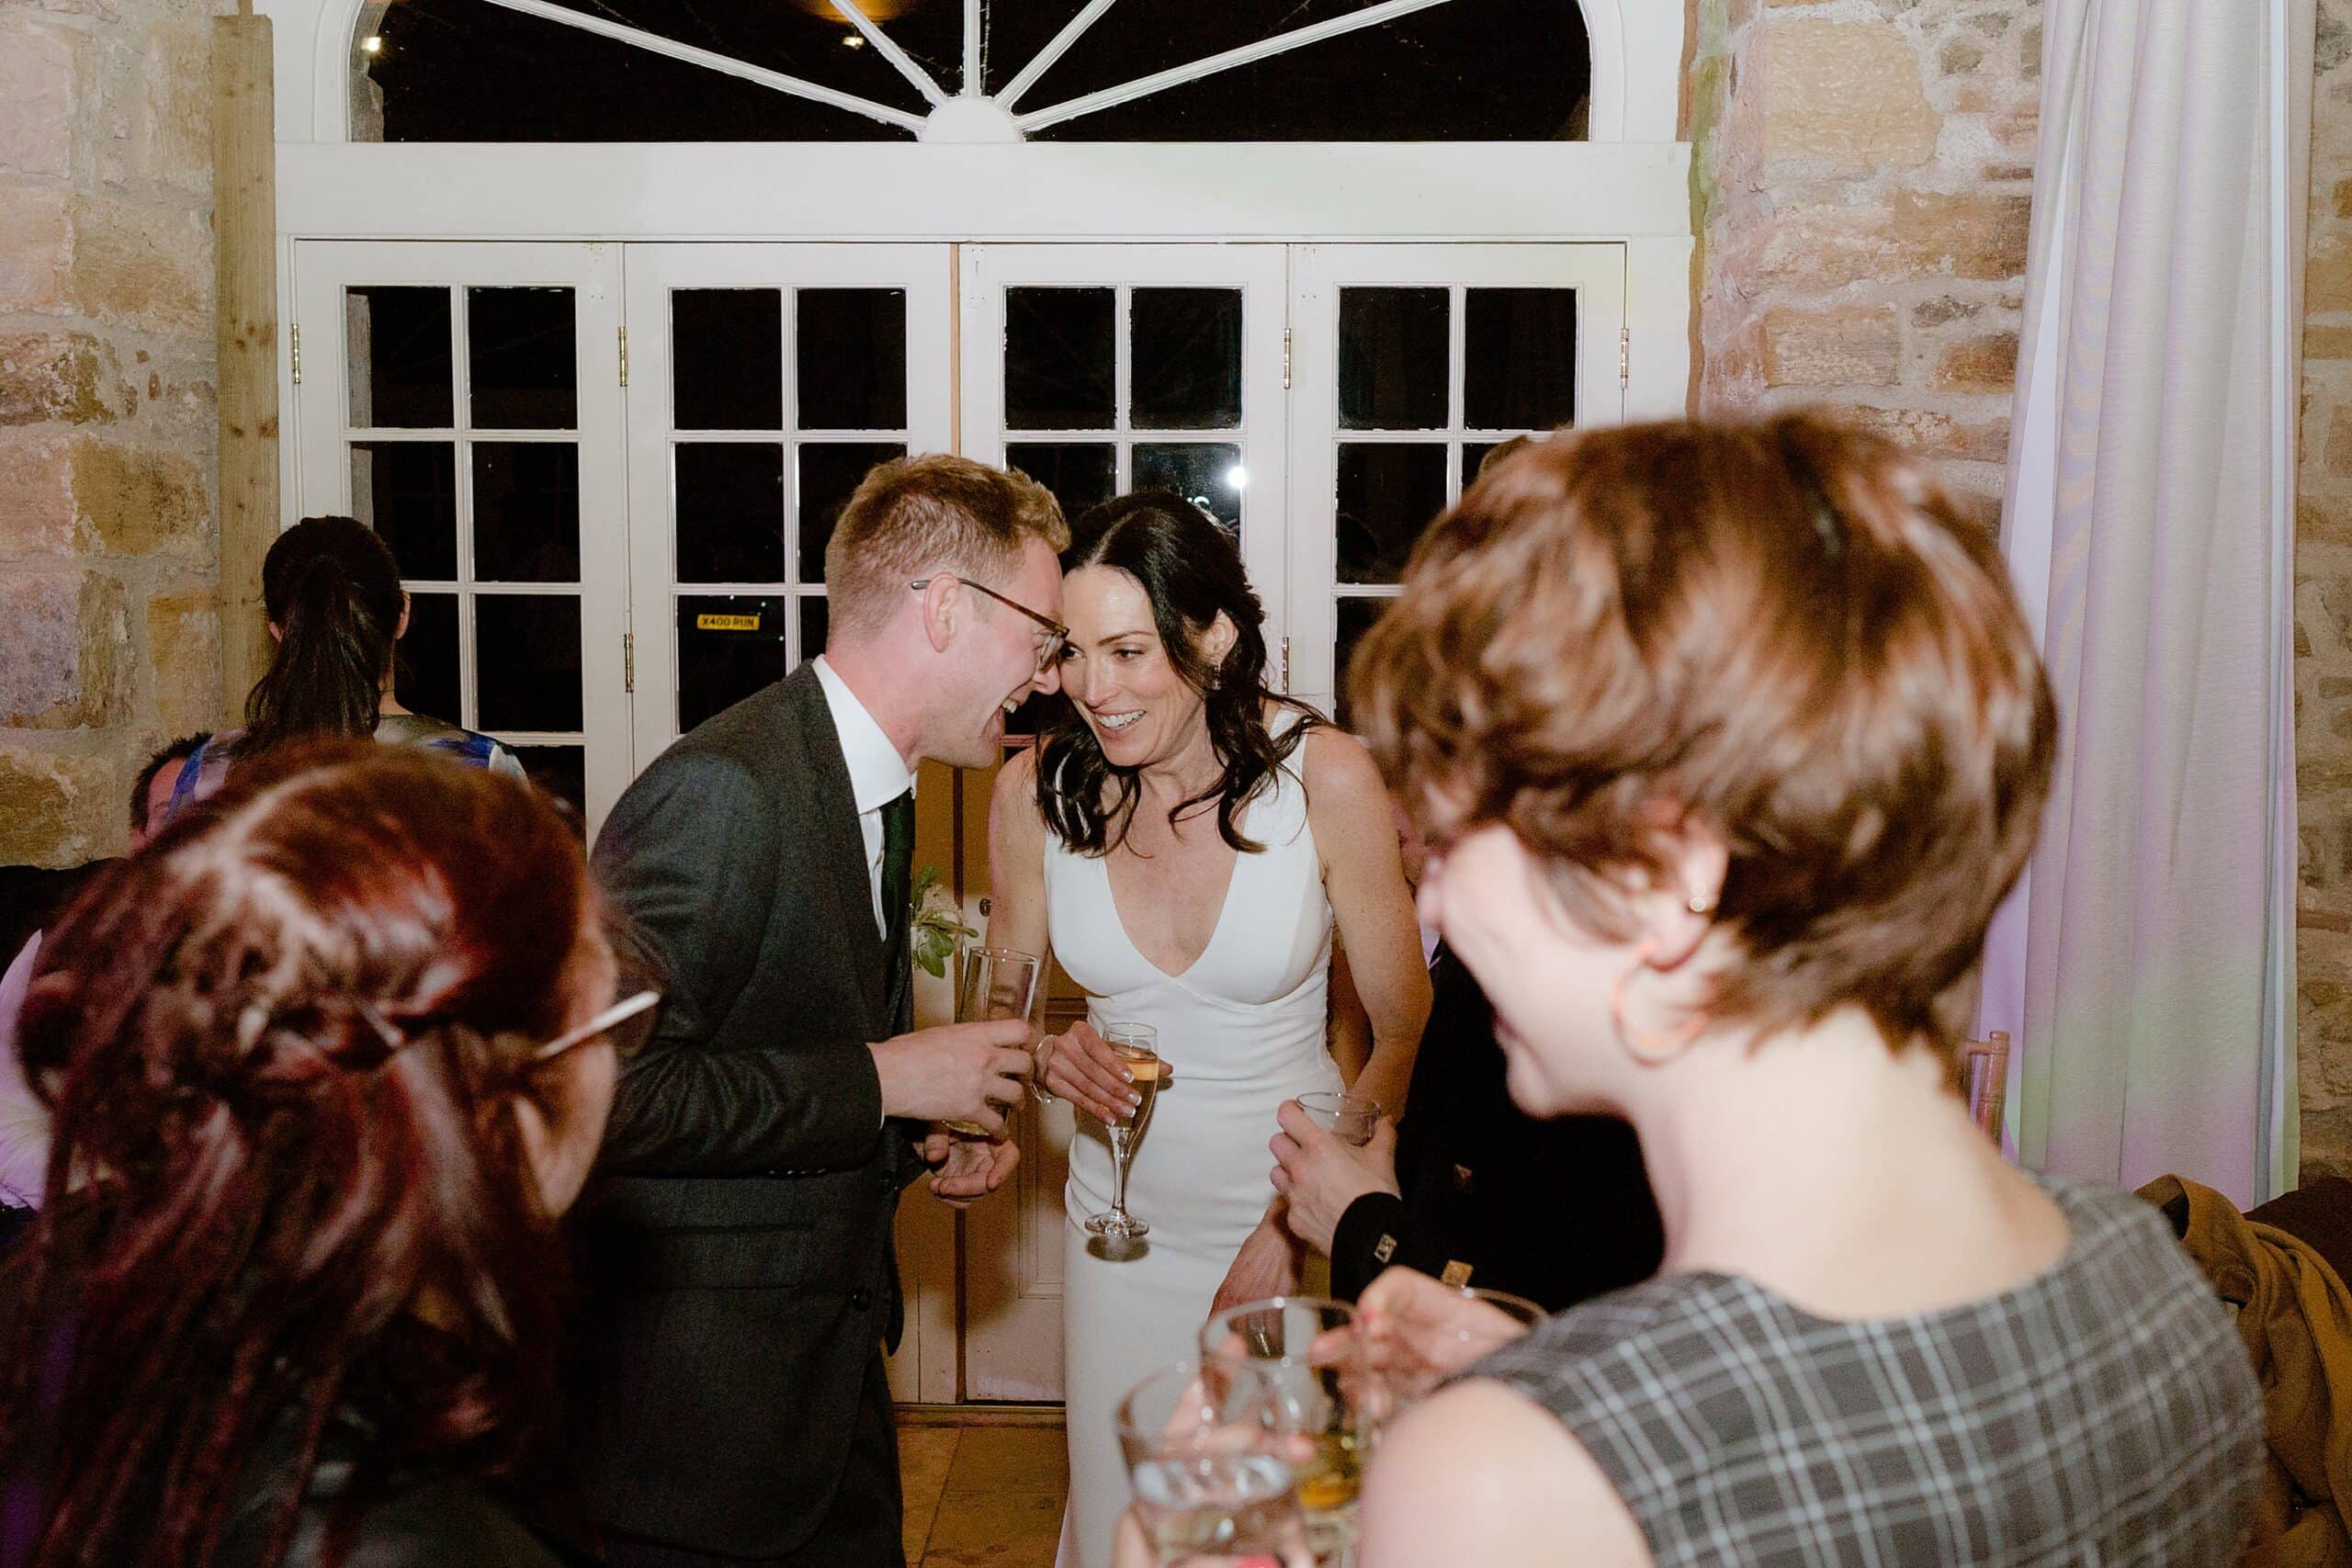 documentary shot of the bride and groom holding champagne glasses and leaning in towards each other at their relaxed wedding reception at their farm wedding venue in east lothian scotland